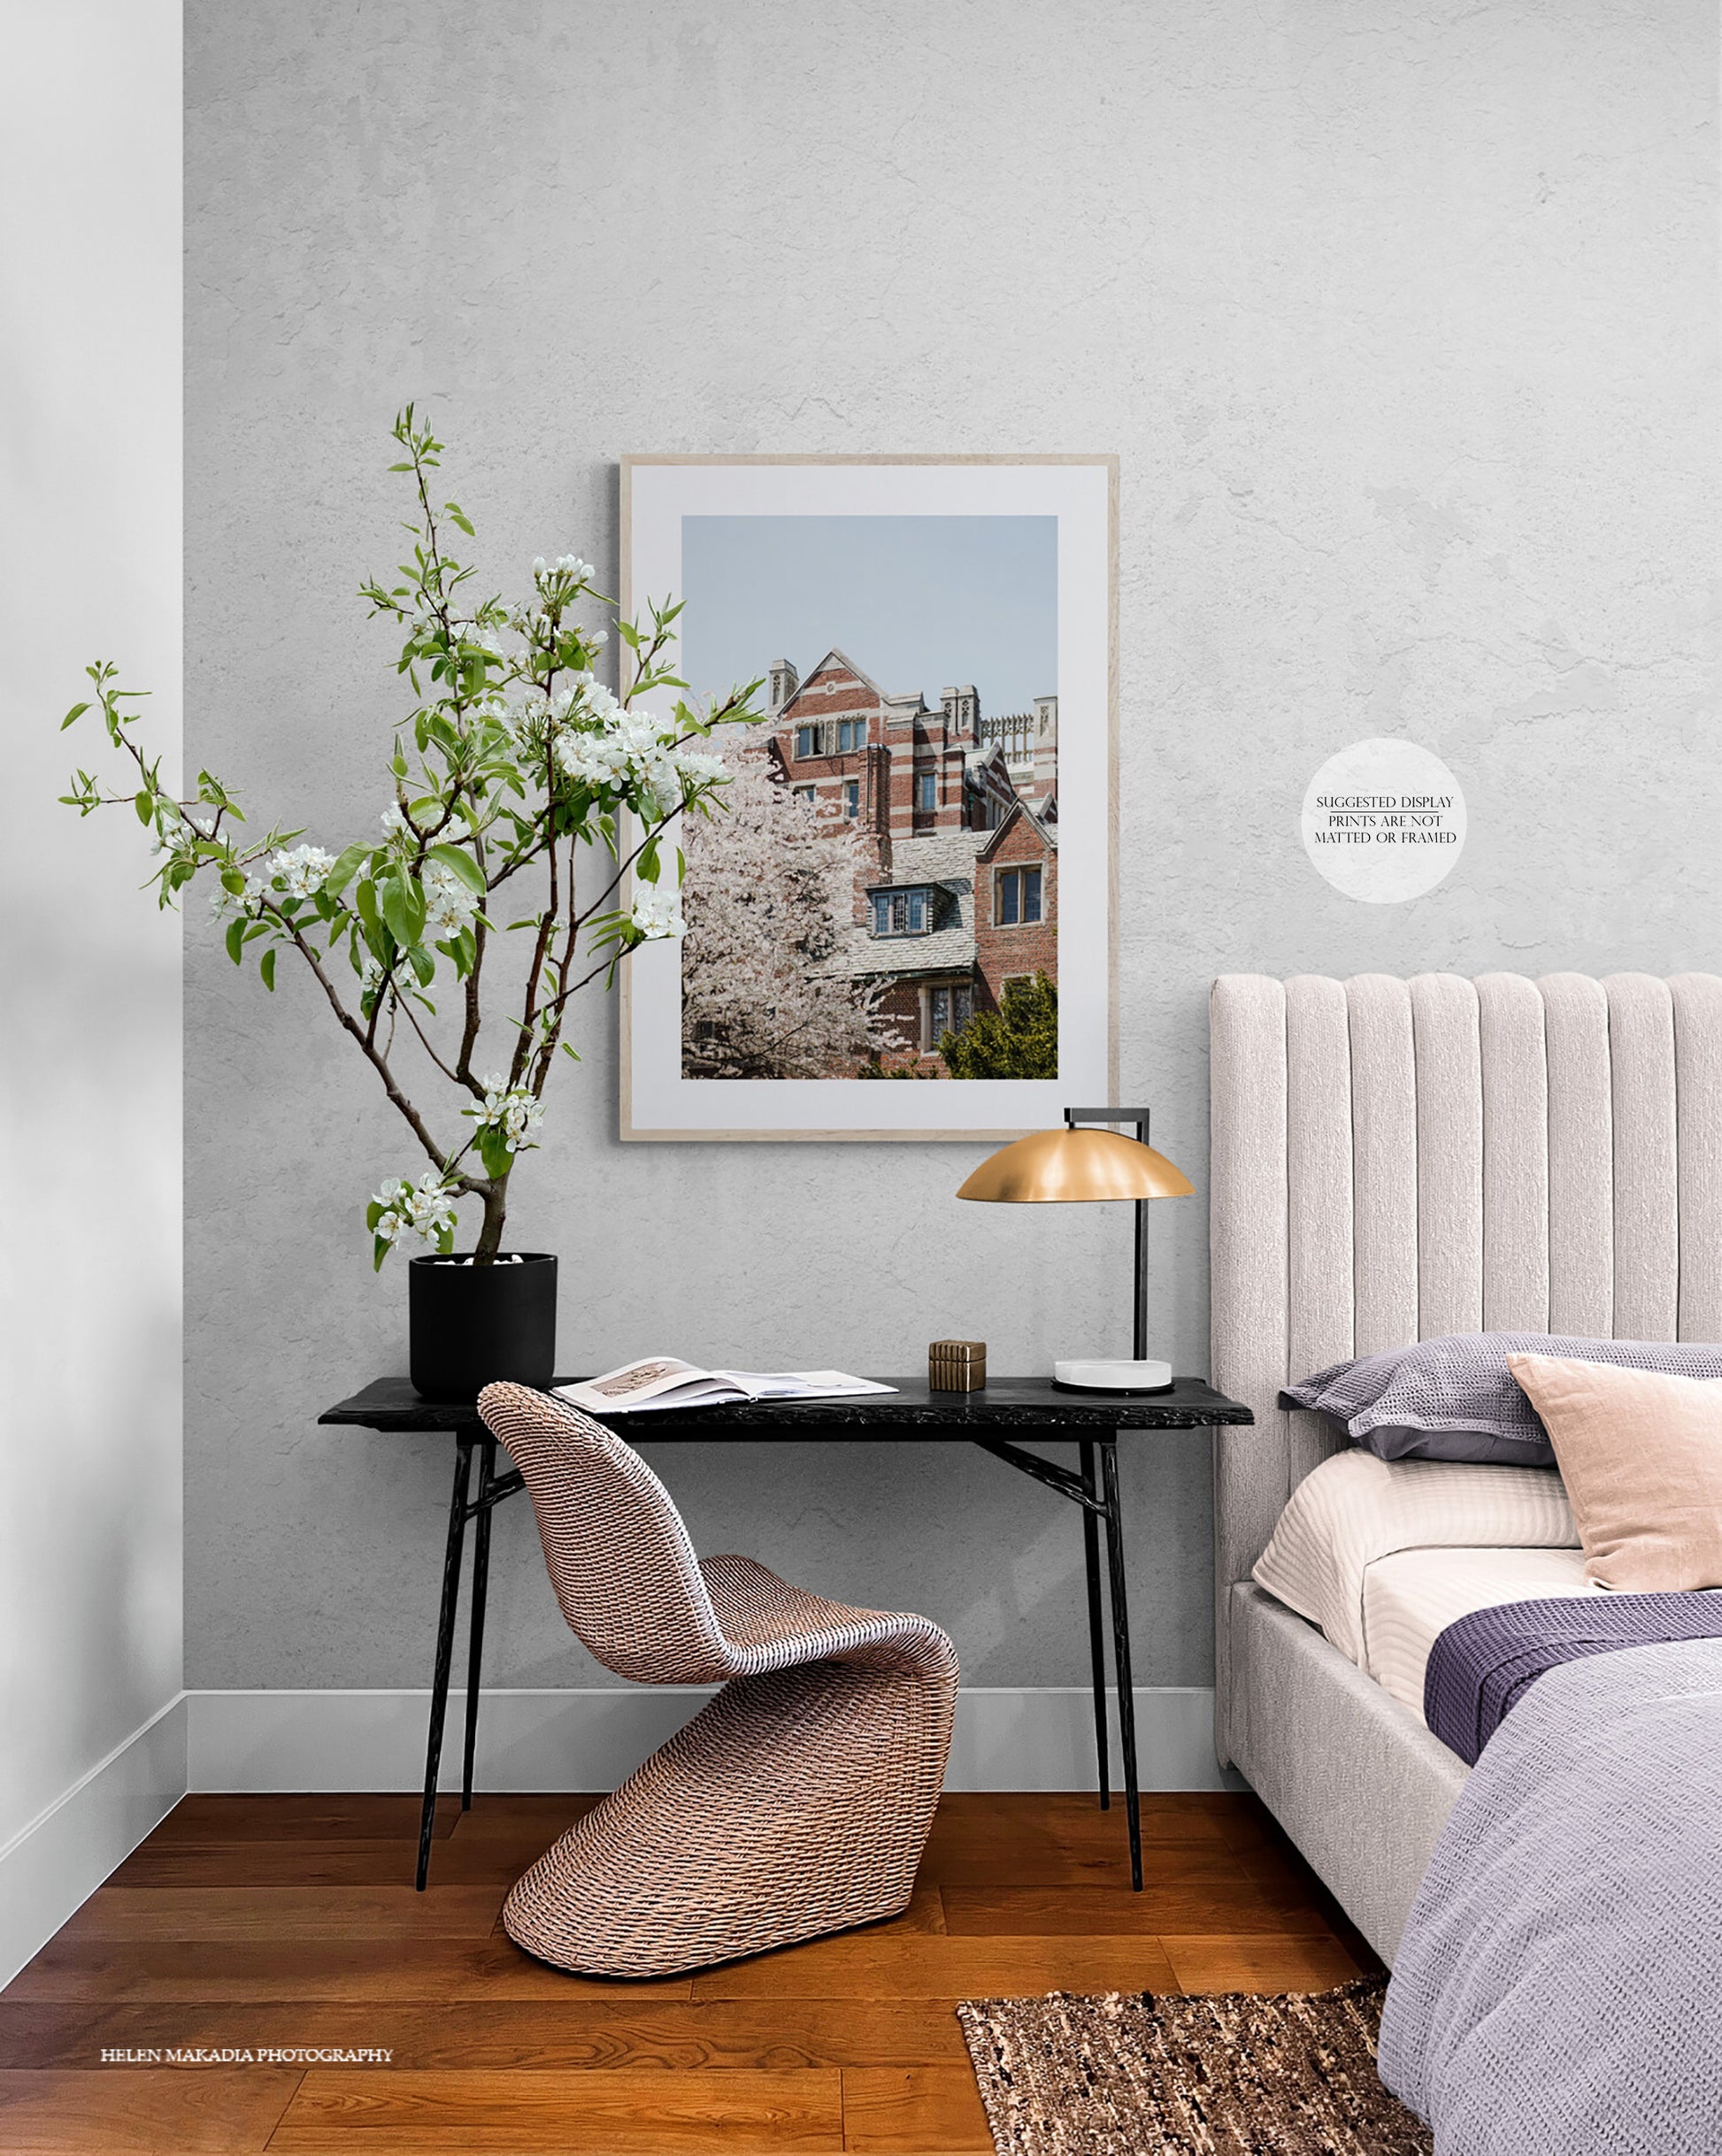 Severance and Tower Court Halls in Springtime Photograph as Framed Wall Art in a Desk and Bedroom